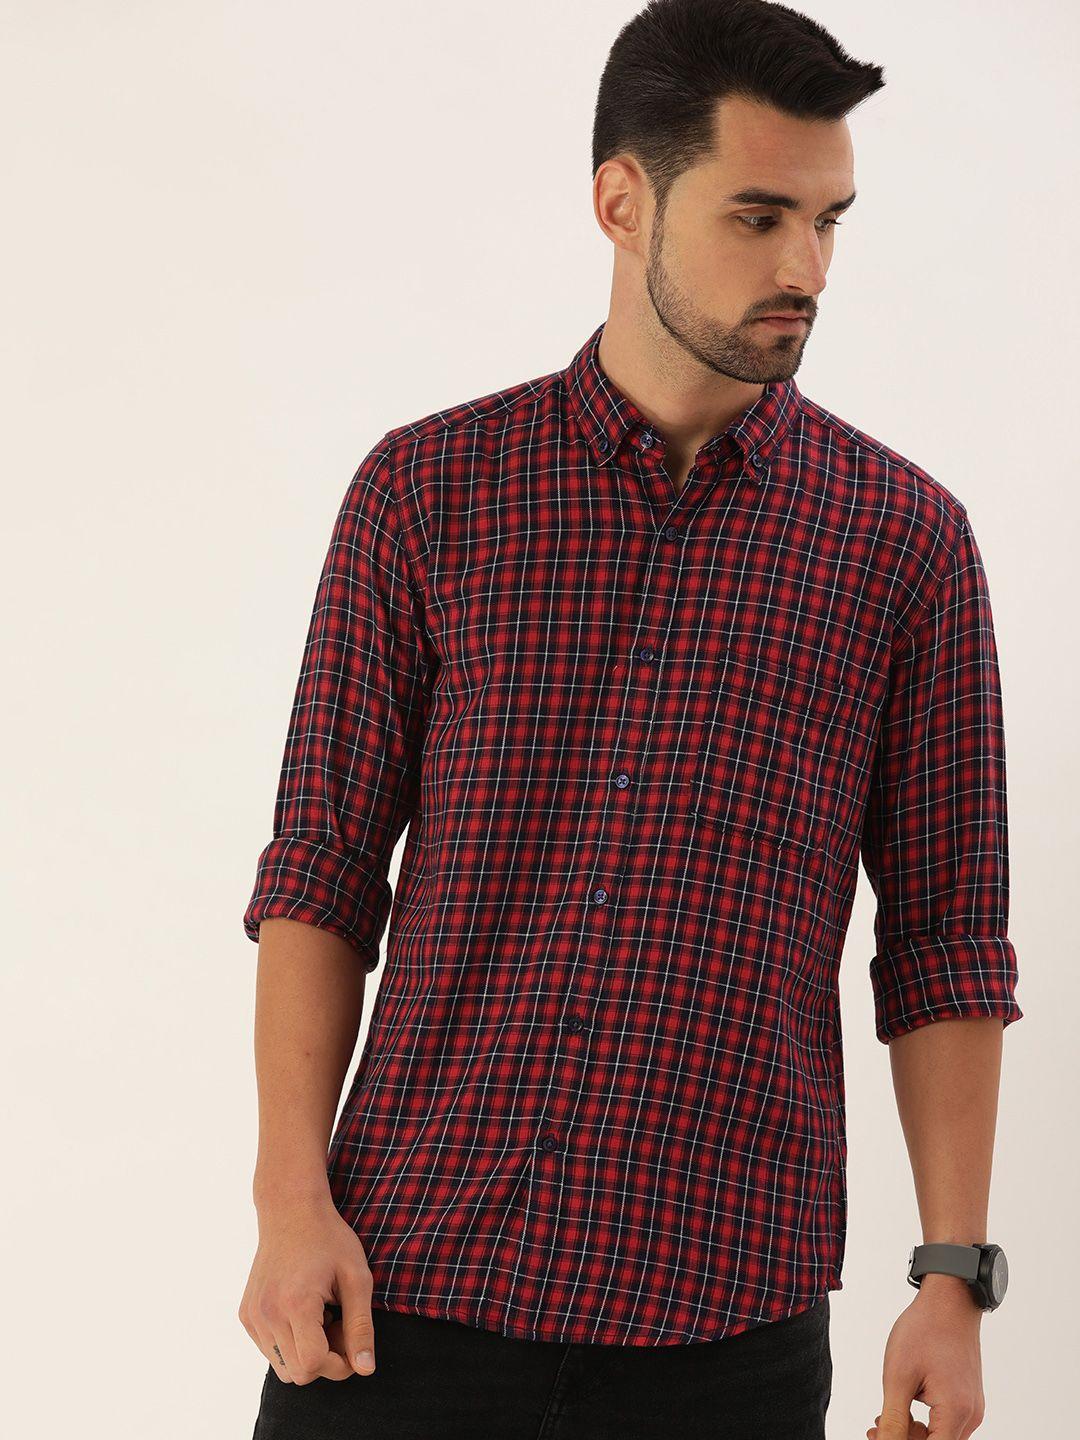 ivoc-men-maroon-&-navy-blue-cotton-classic-checked-casual-shirt